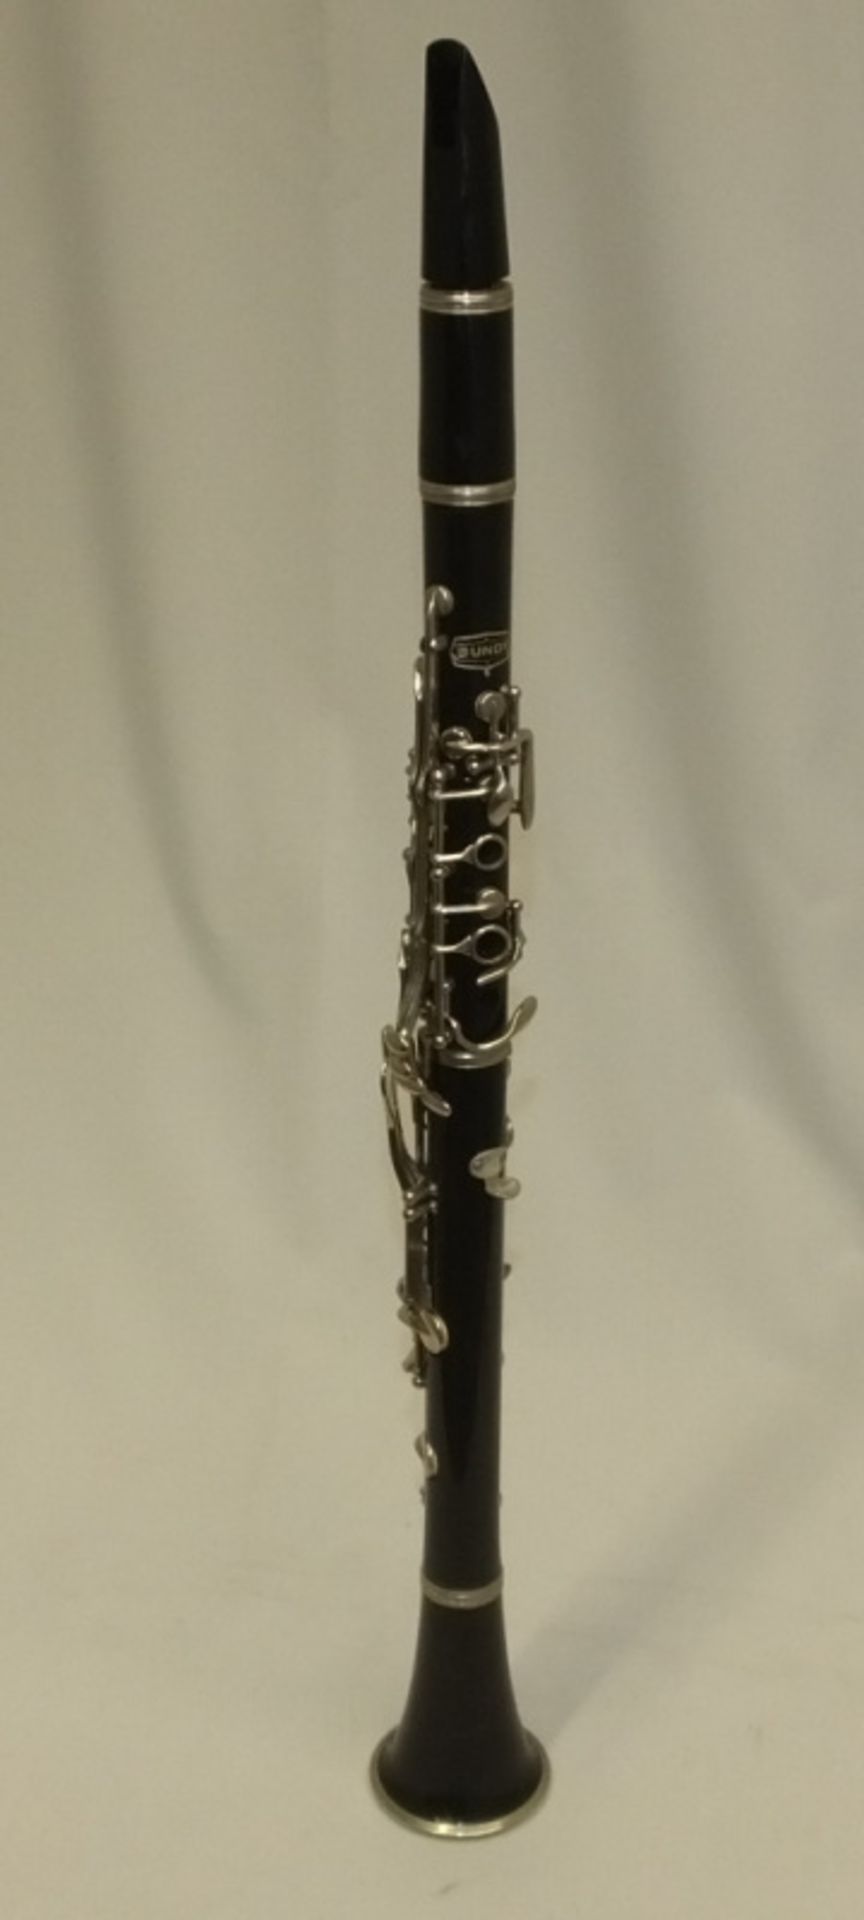 Bundy Resonite Clarinet in case - serial number S243328 - Please check photos carefully - Image 15 of 19